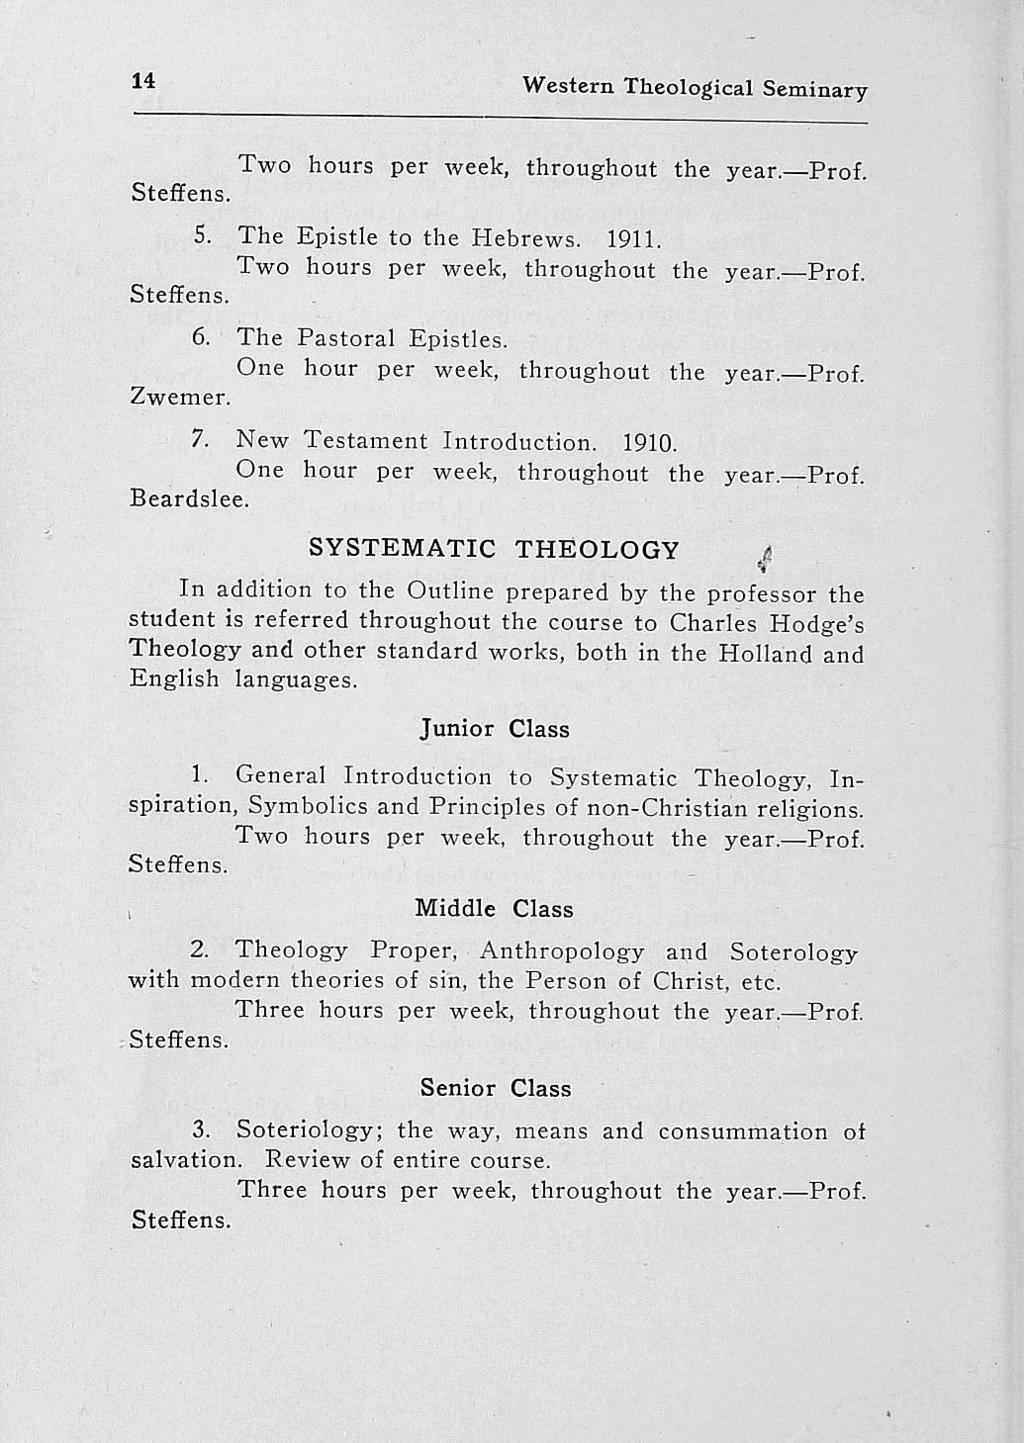 3. Soteriology; 14 Western Theological Seminary Two hours per week, throughout the year. Prof. Steffens. 5. The Epistle to the Plebrews. 1911. Two hours per week, throughout the year. Prof. Steffens. 6.